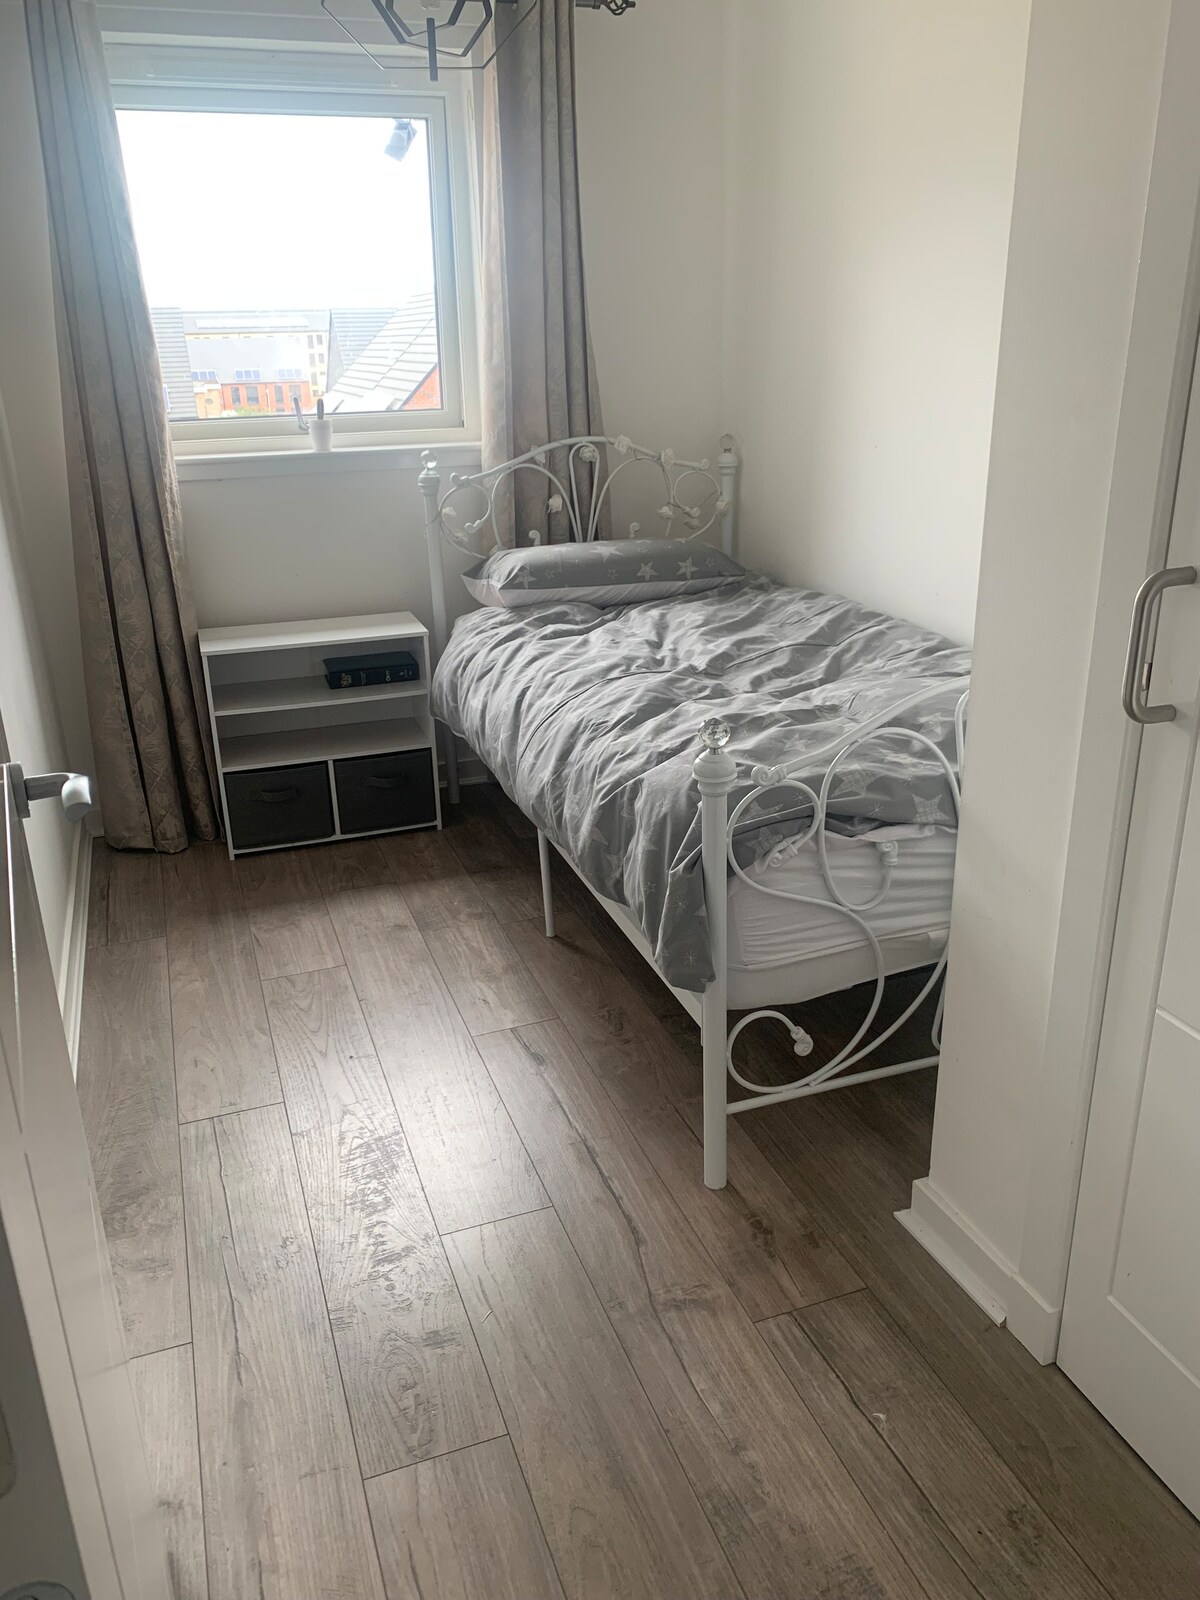 Single room in a new build house